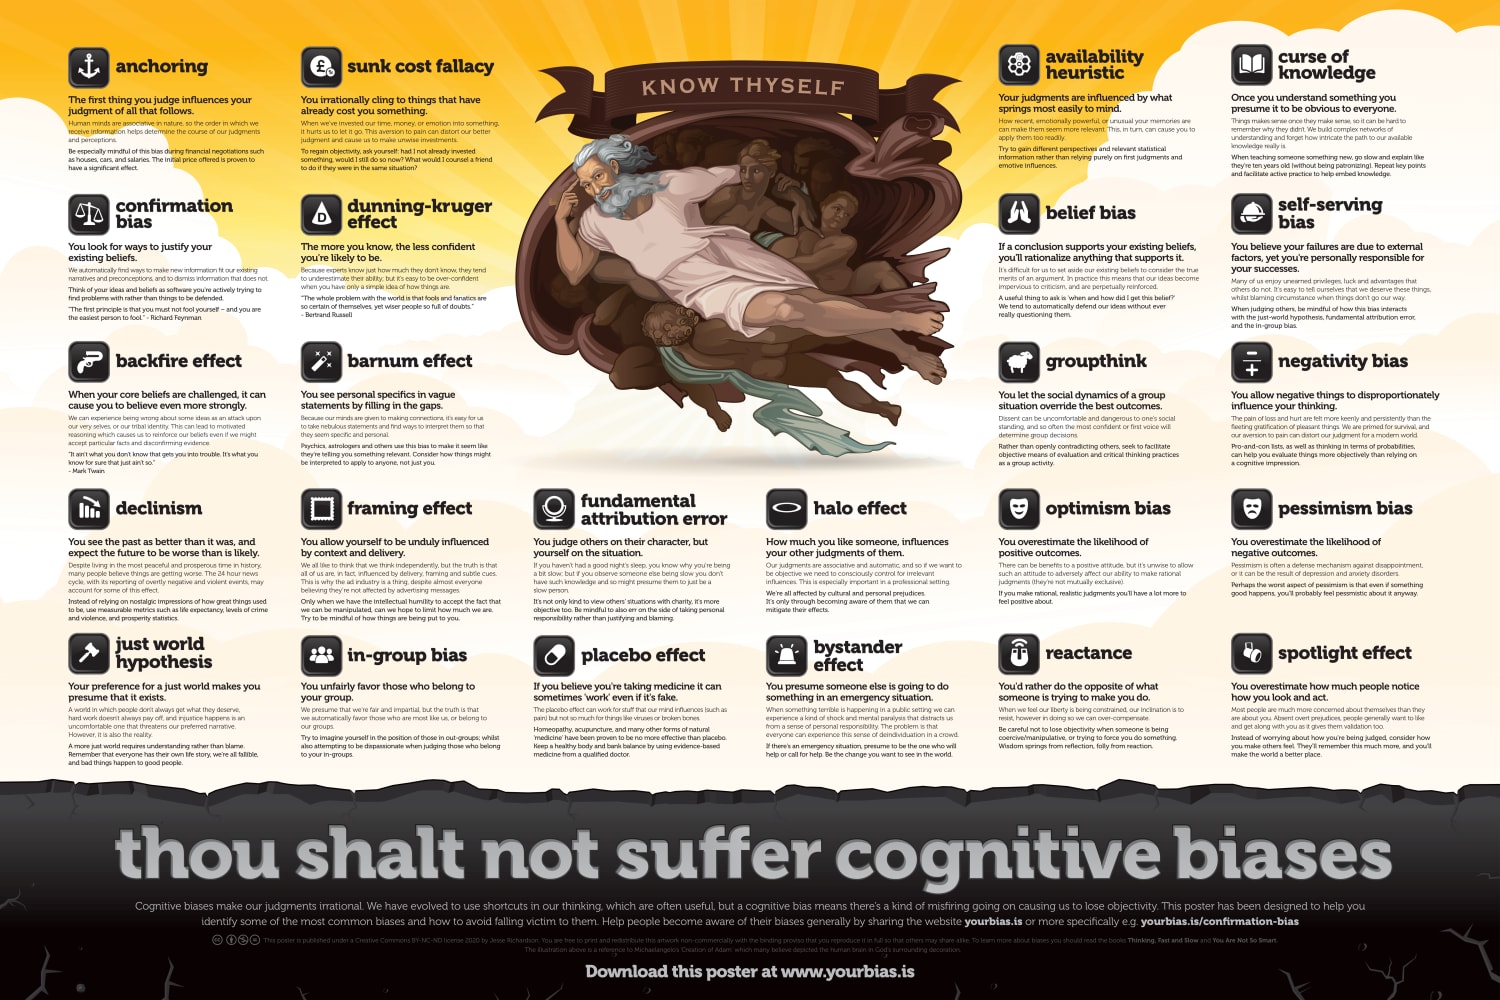 A guide summarising all the cognitive biases that cloud our judgement.